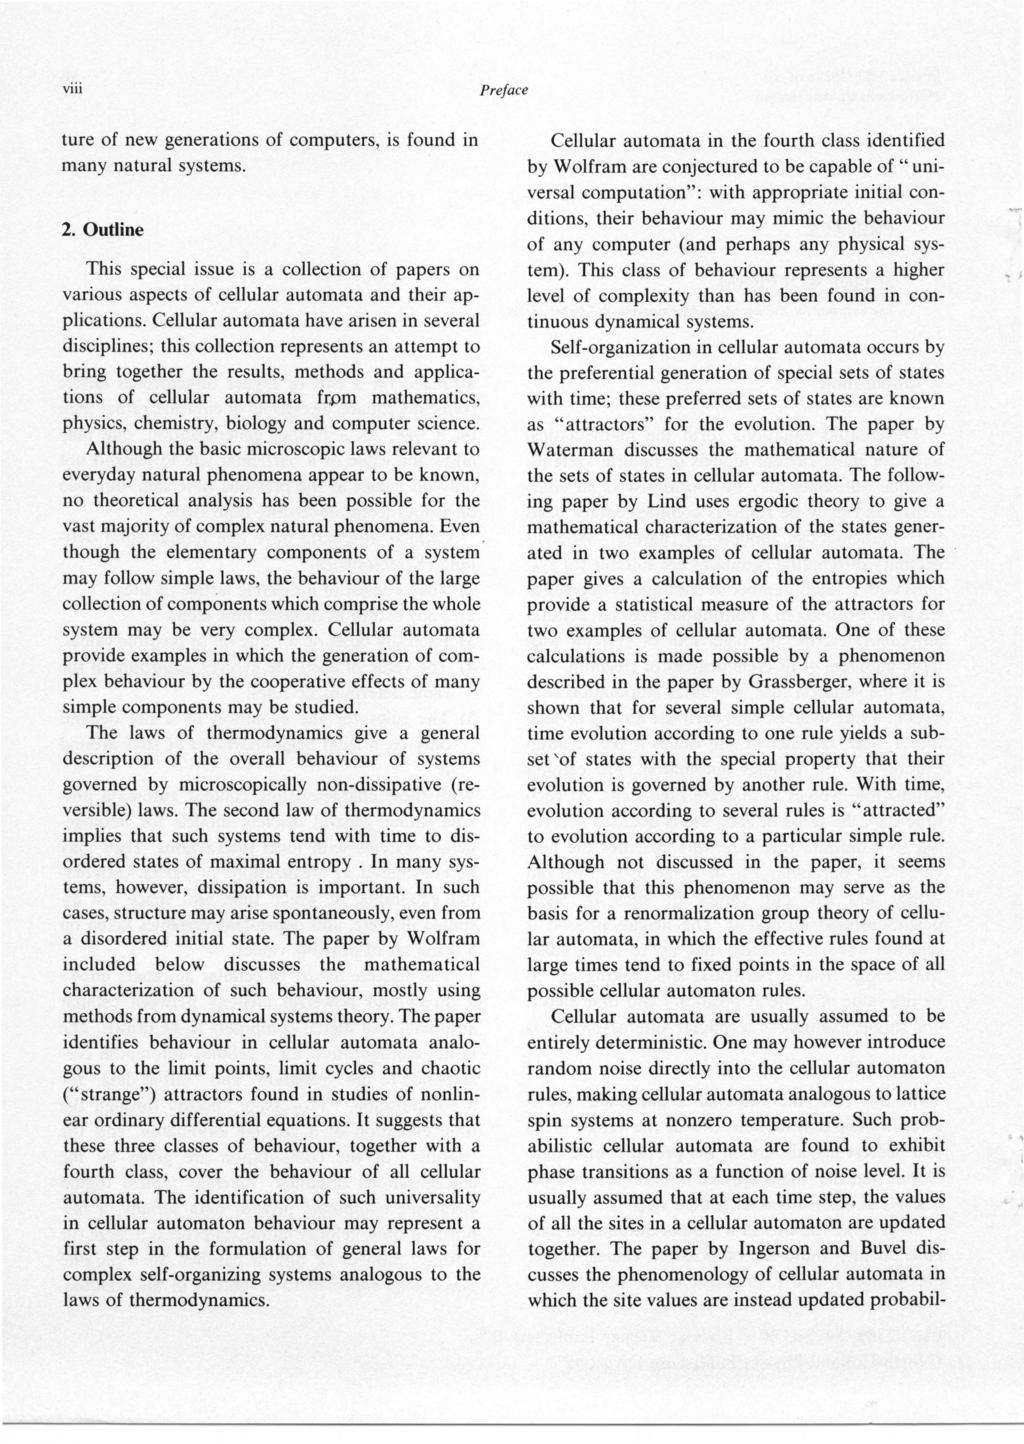 VllI ture of new generations of computers, is found in many natural systems. 2. Outline This special issue is a collection of papers on various aspects of cellular automata and their applications.